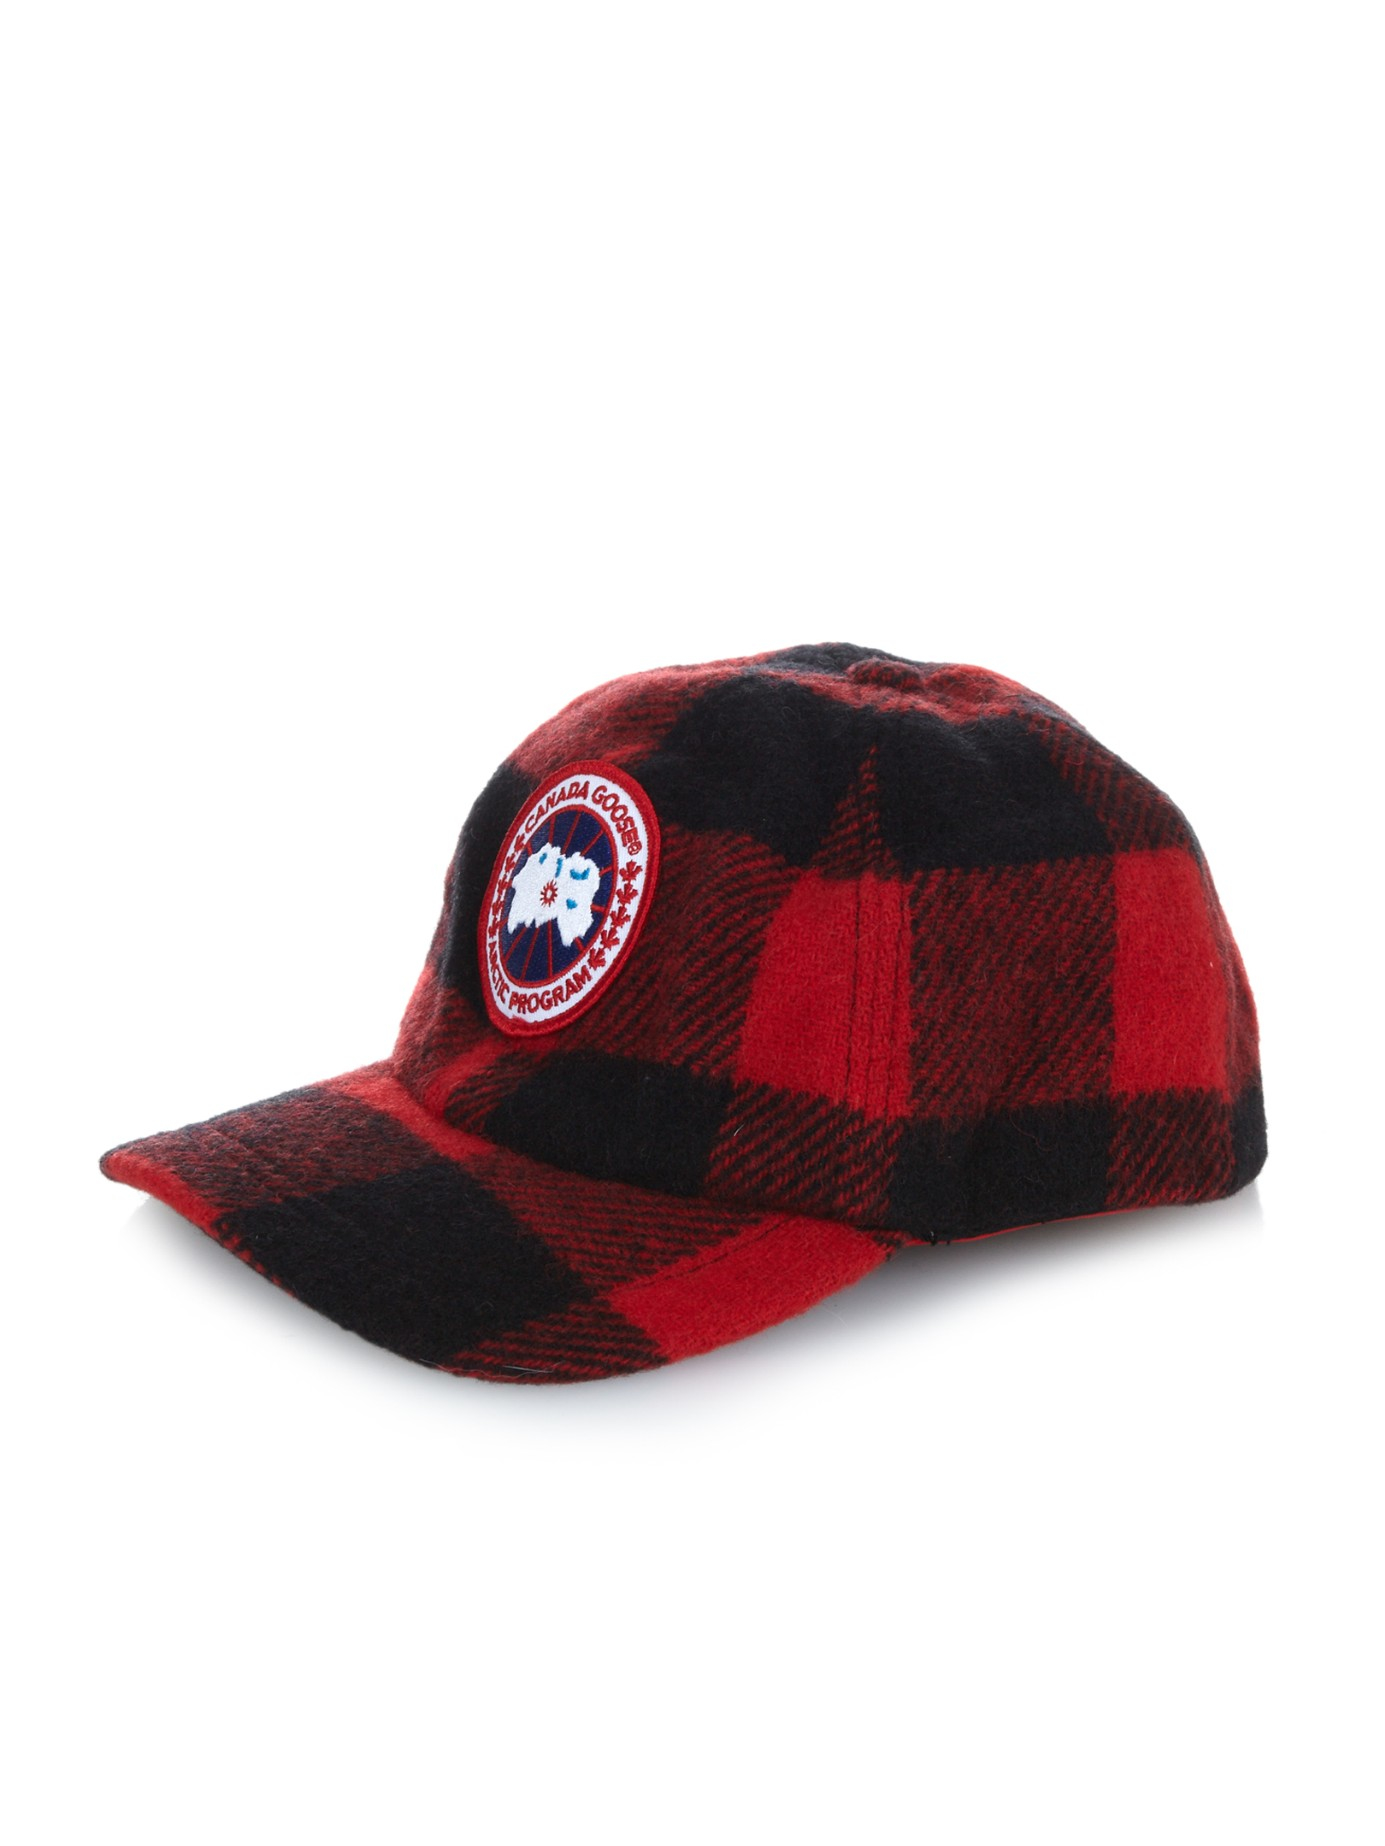 Canada Goose Plaid Wool-blend Hat in Black Red (Black) - Lyst